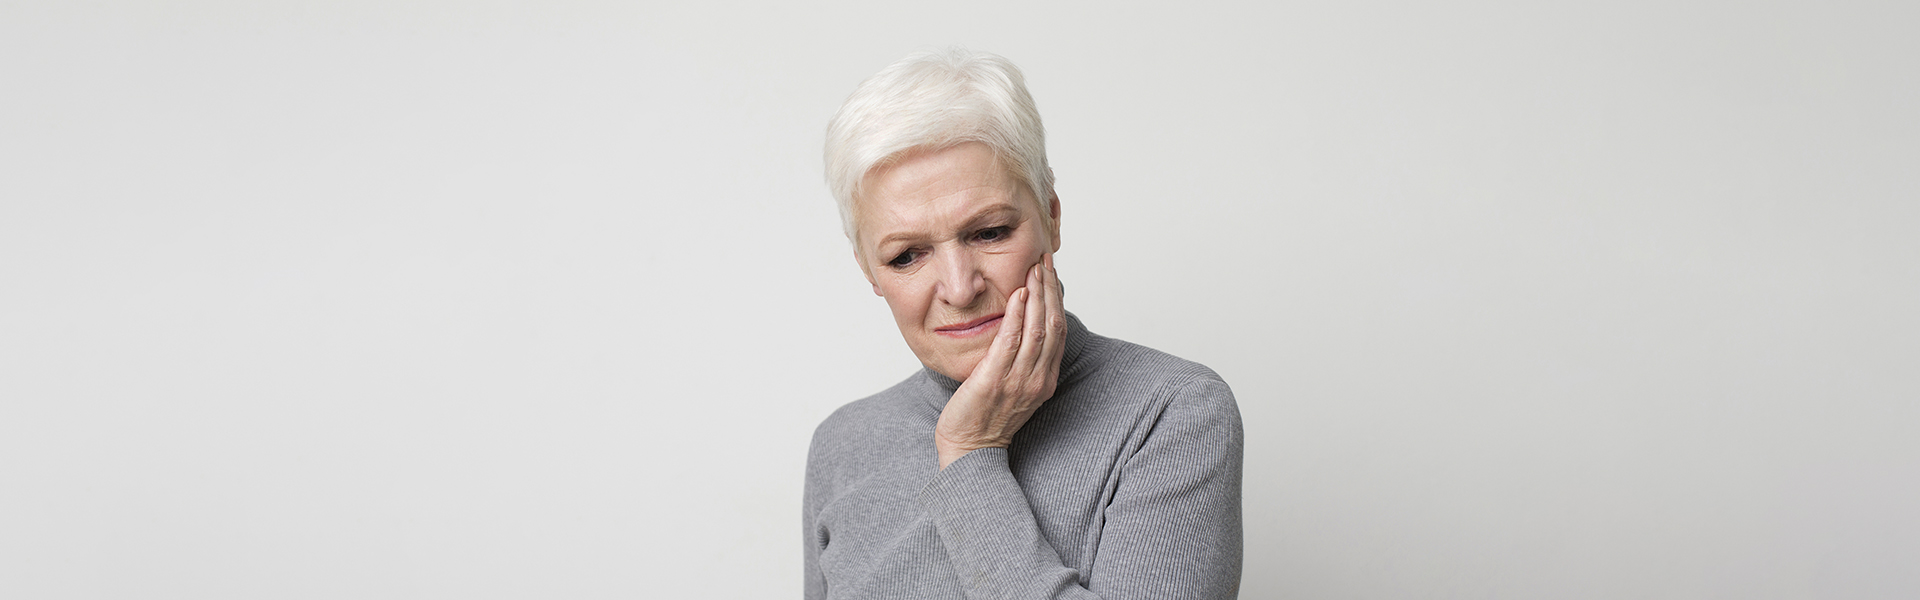 How to Deal with Excruciating Tooth Pain Before Your Appointment?